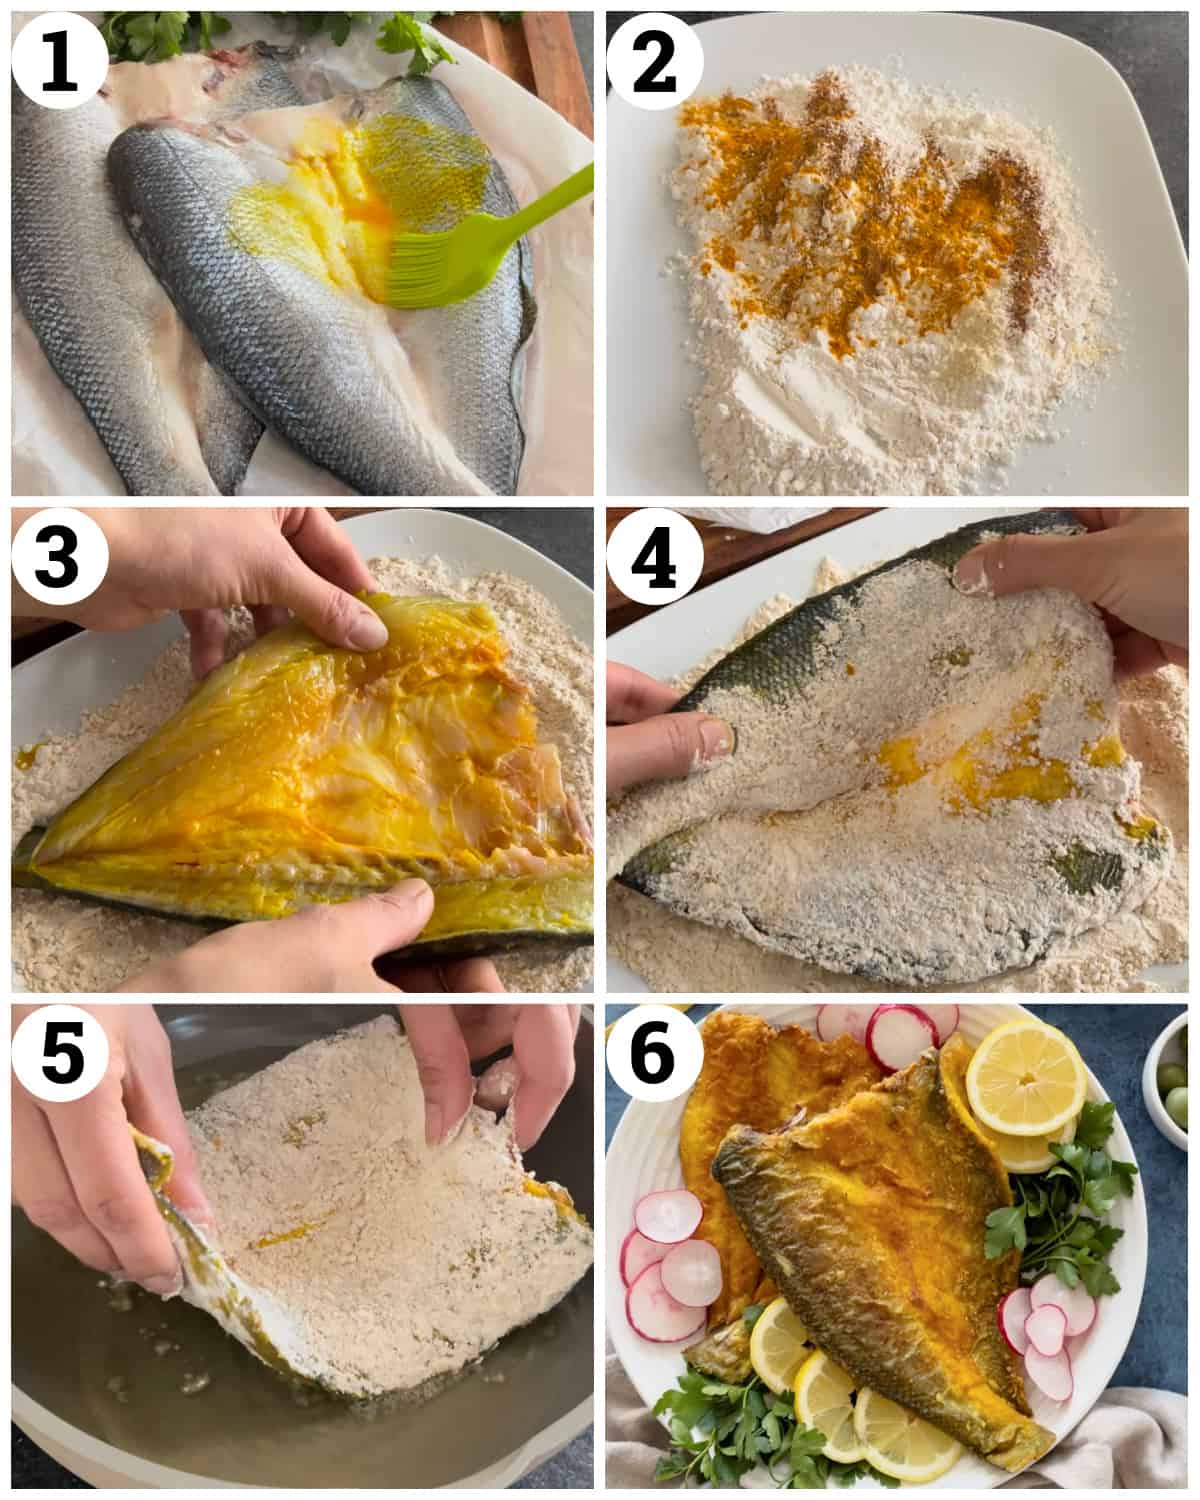 Brush the fish with saffron then mix the flour with spices and dredge the fish in flour and fry in oil. 